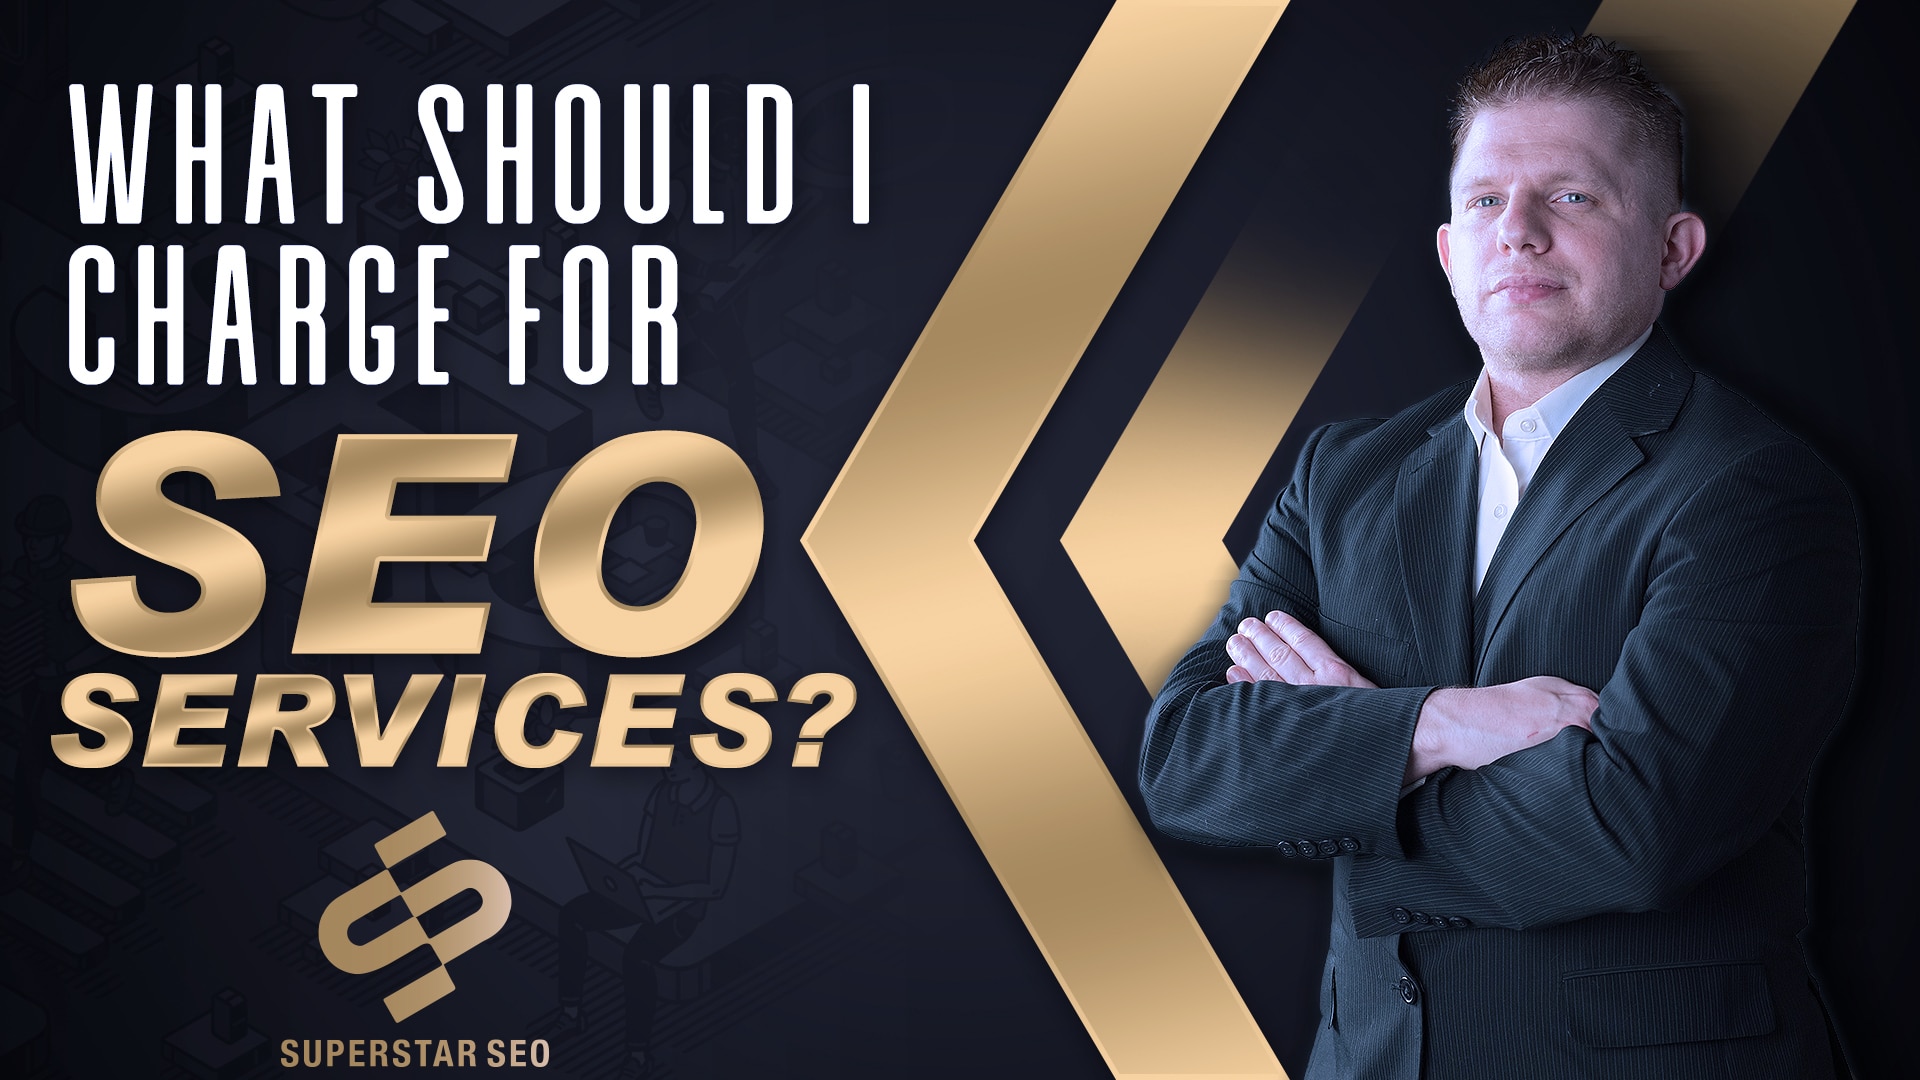 How To Price SEO Services